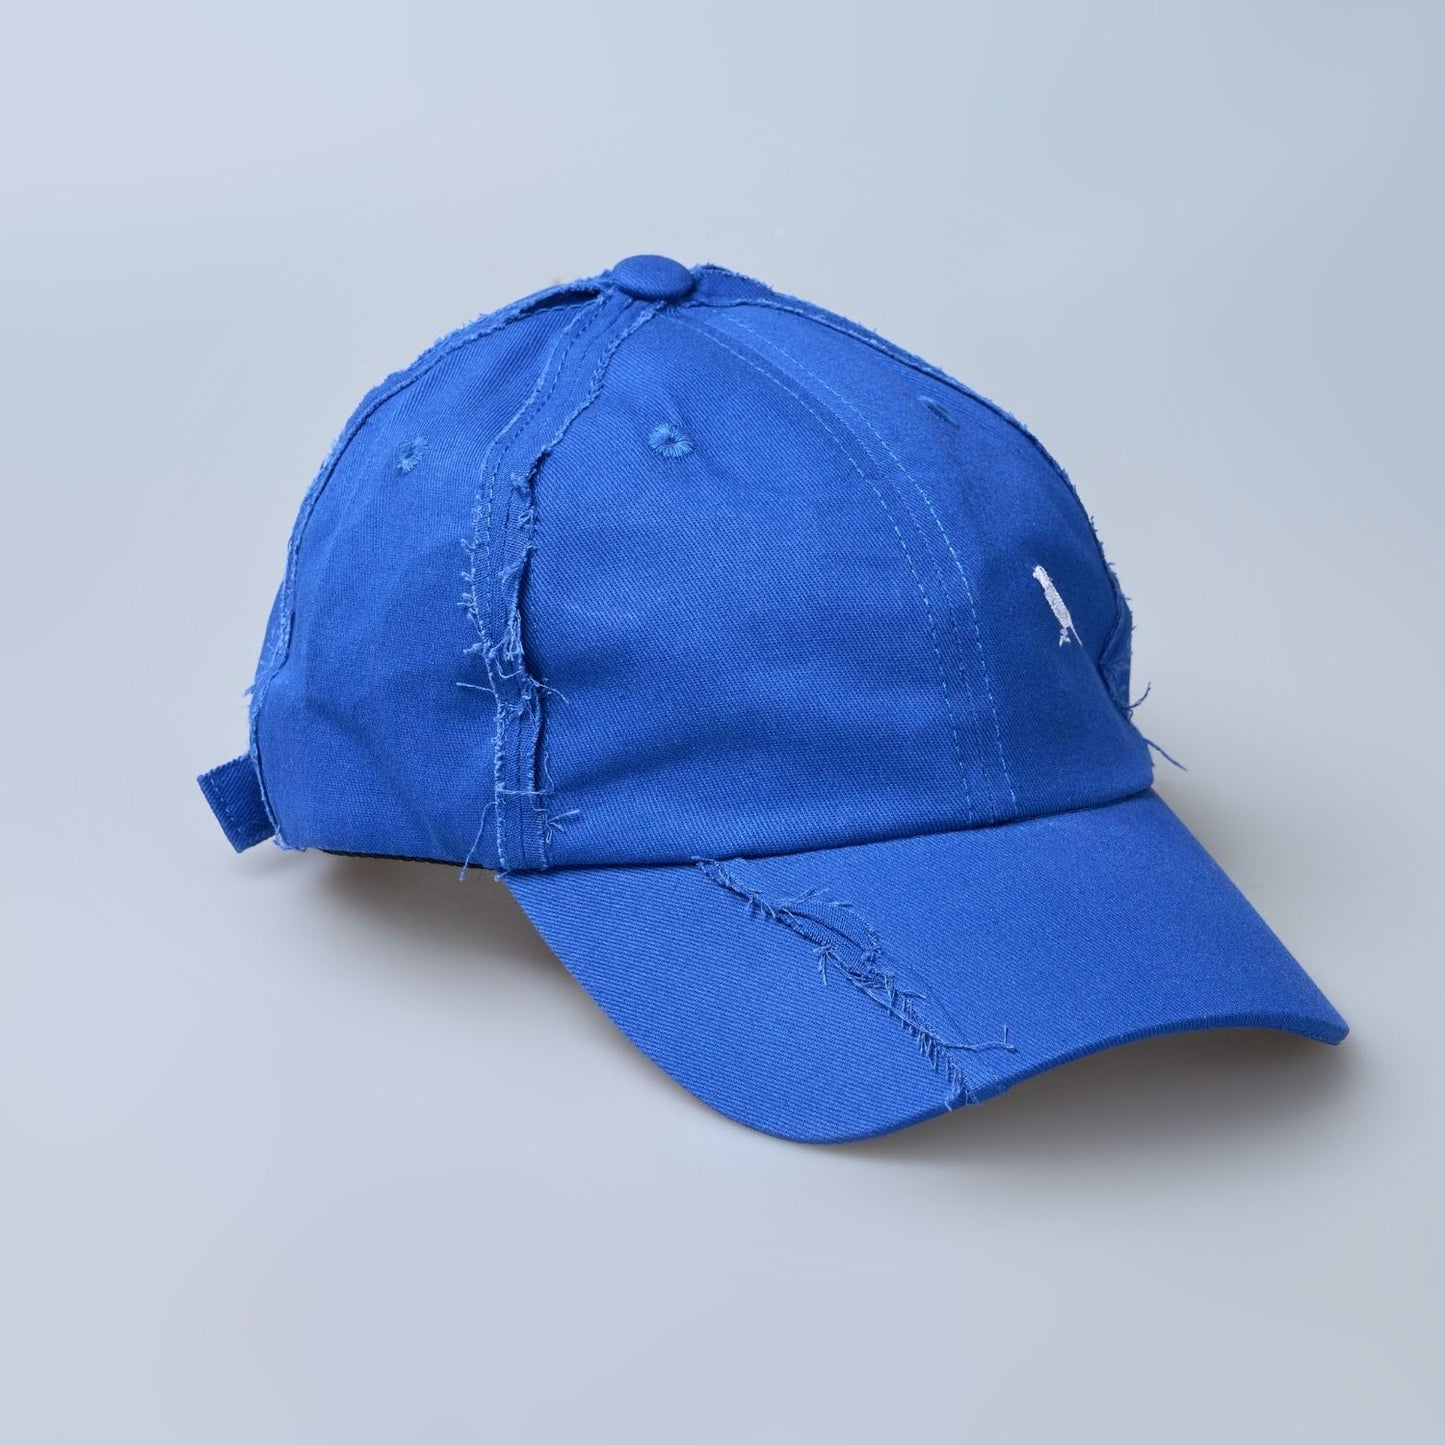 Blue colored, wide brim cap for men with adjustable strap, close up view.